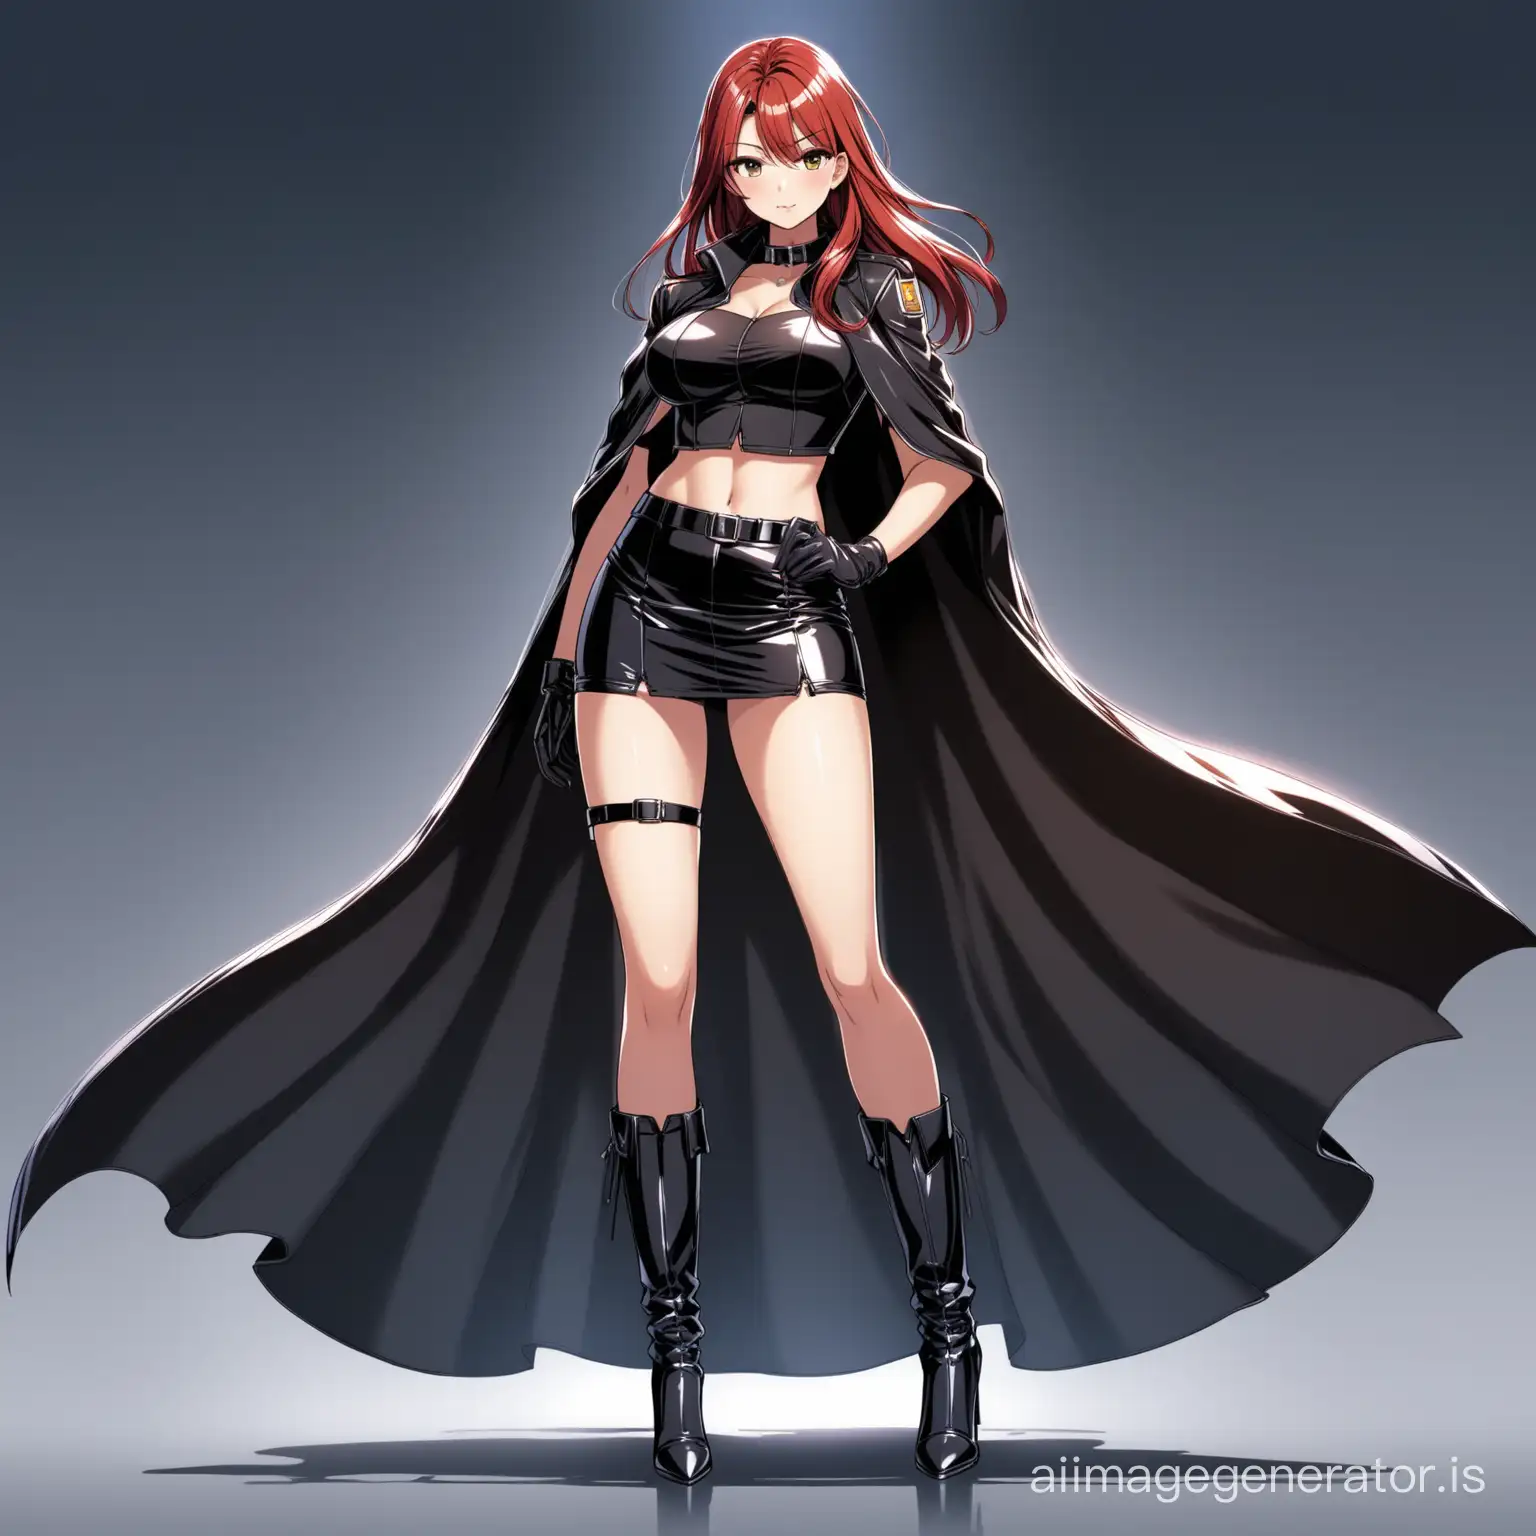 Stylish-Anime-Secret-Agent-in-Leather-Outfit-and-Cape